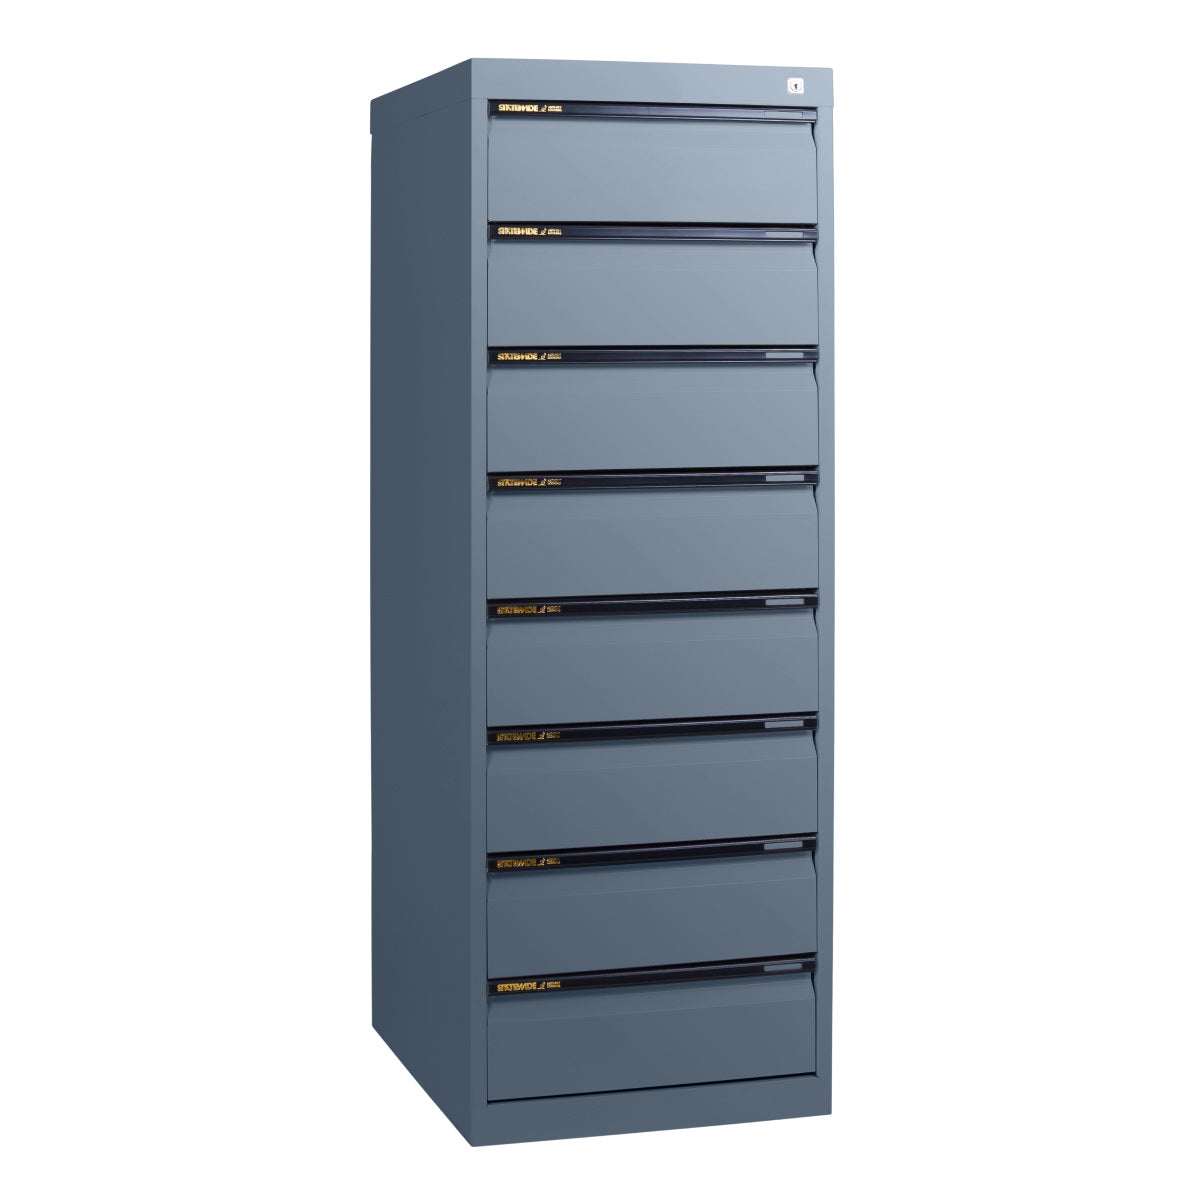 STATEWIDE CD AND DUPLEX CARD CABINETS 4, 6, 7 AND 8 DRAWERS